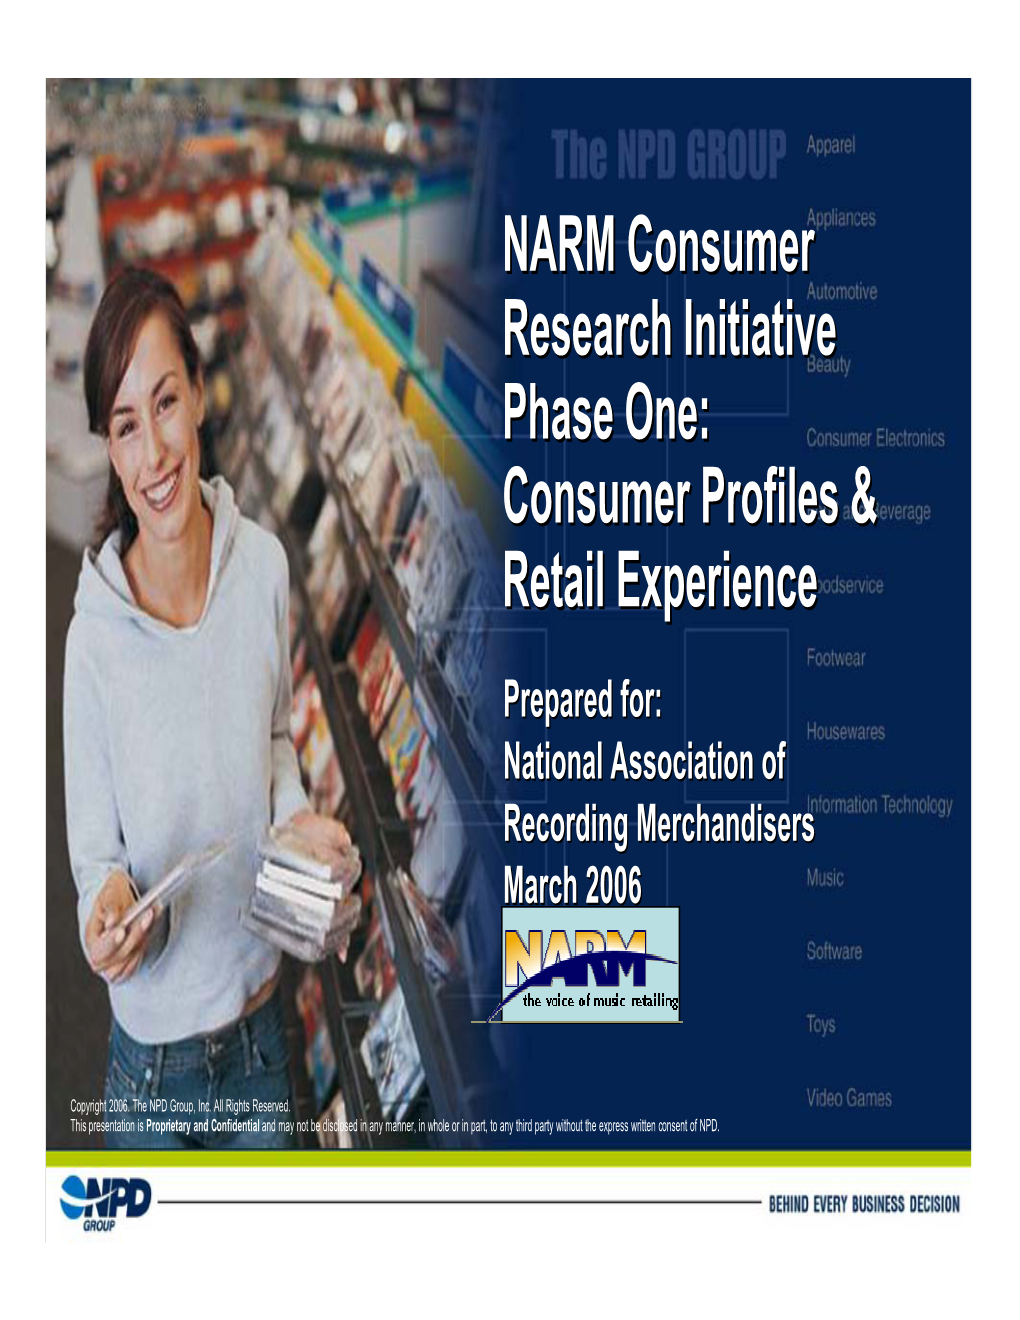 NARM Consumer Research Initiative Phase One: Consumer Profiles & Retail Experience